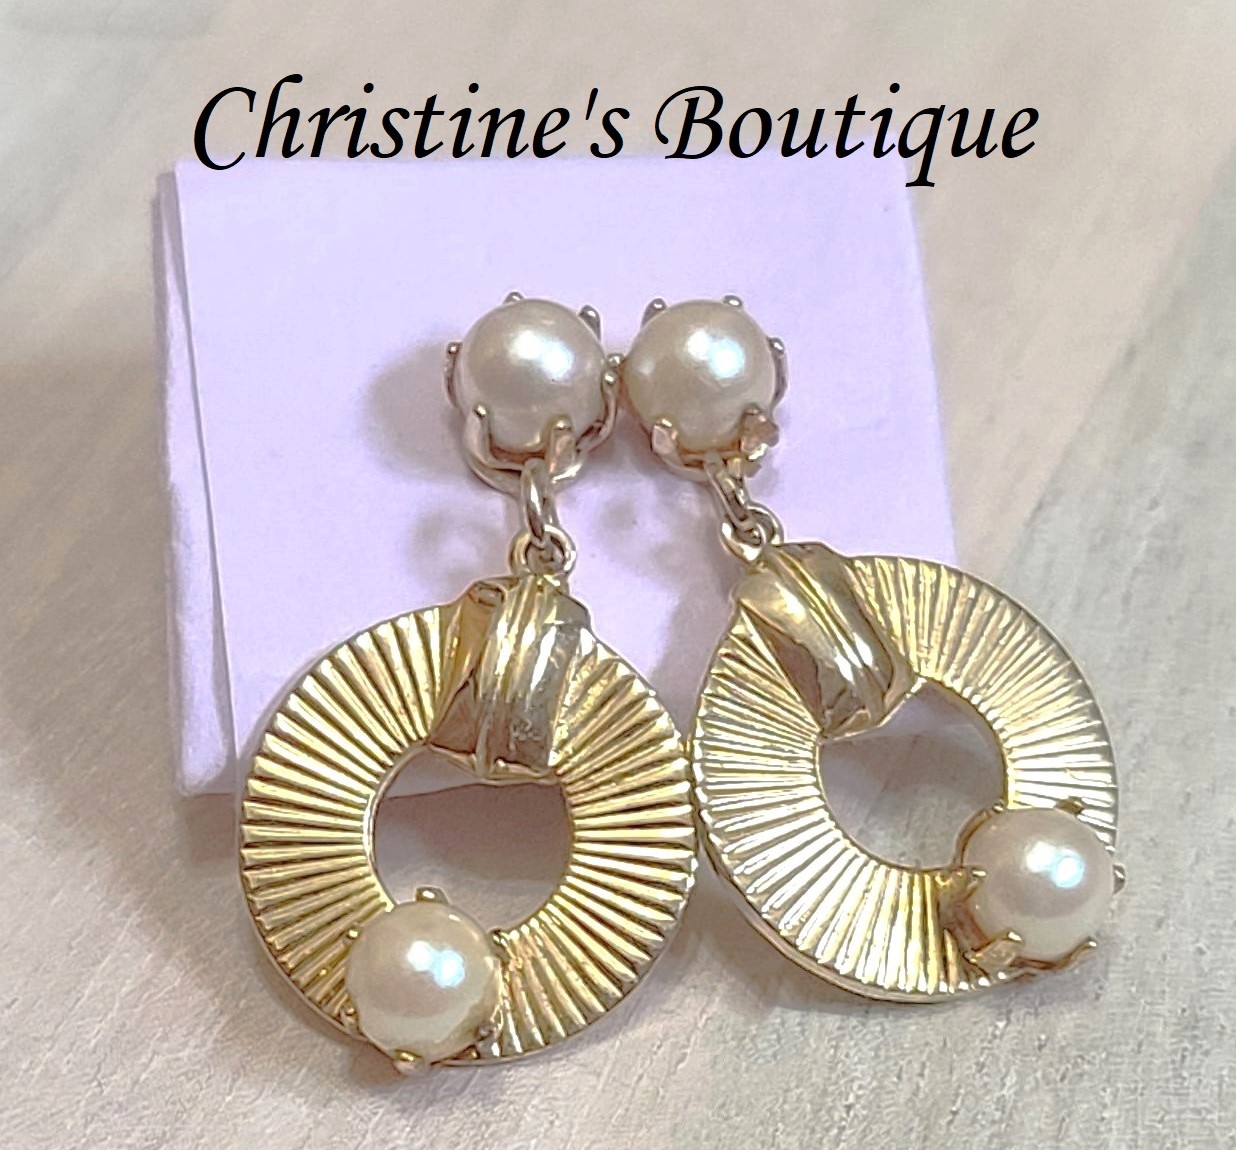 Vintage pearl hoops with goldtone finish, clip on earrings